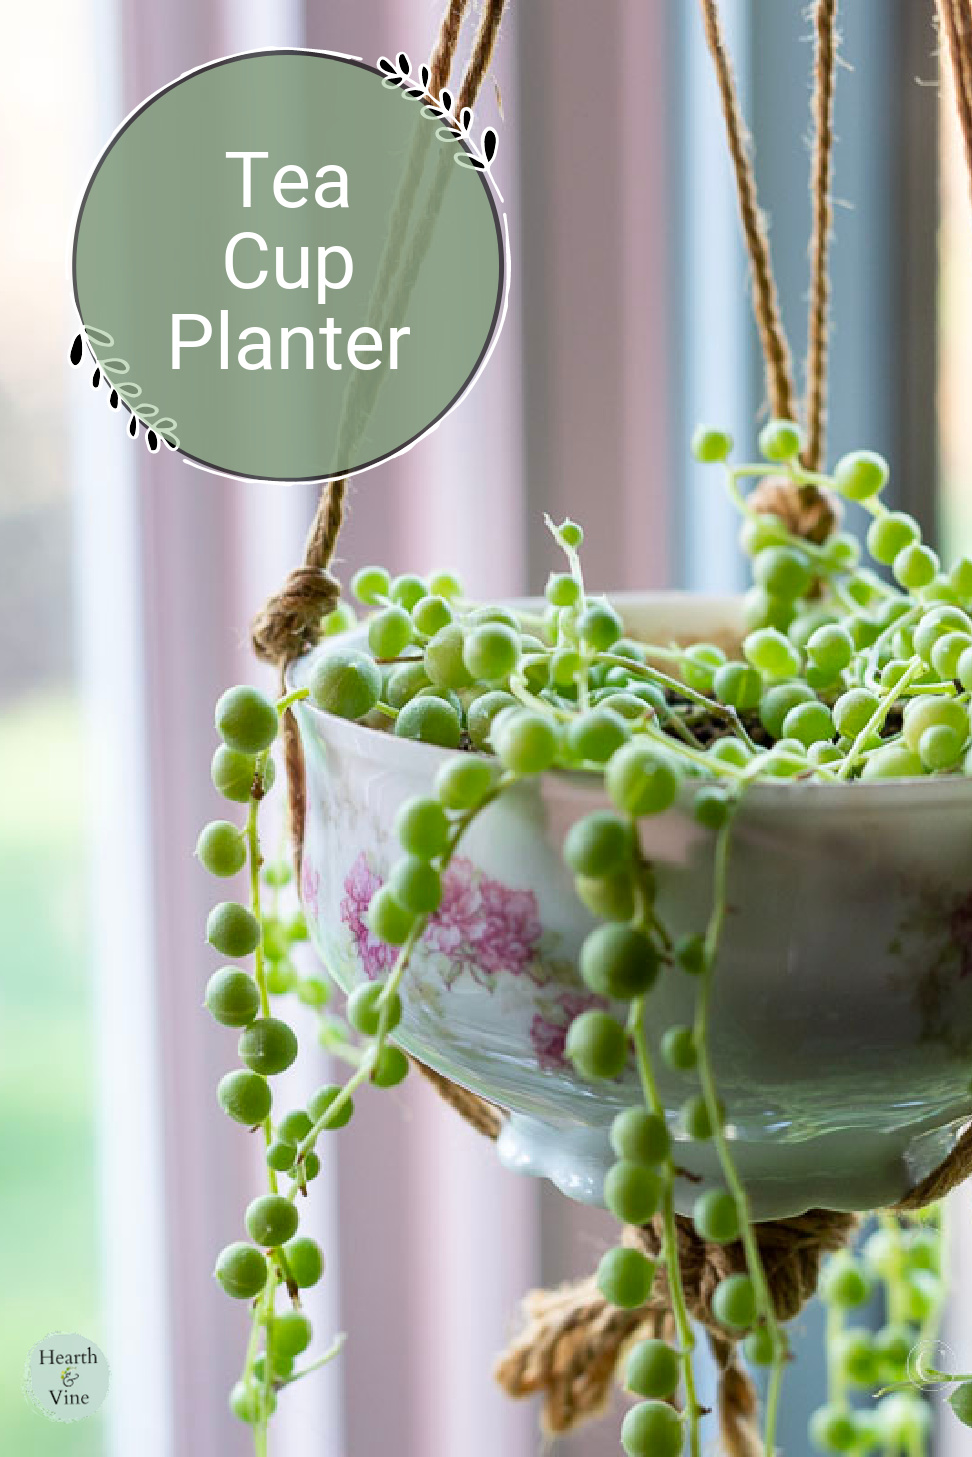 A hanging tea cup planter with roses on the cup and a string of pearls planted inside.